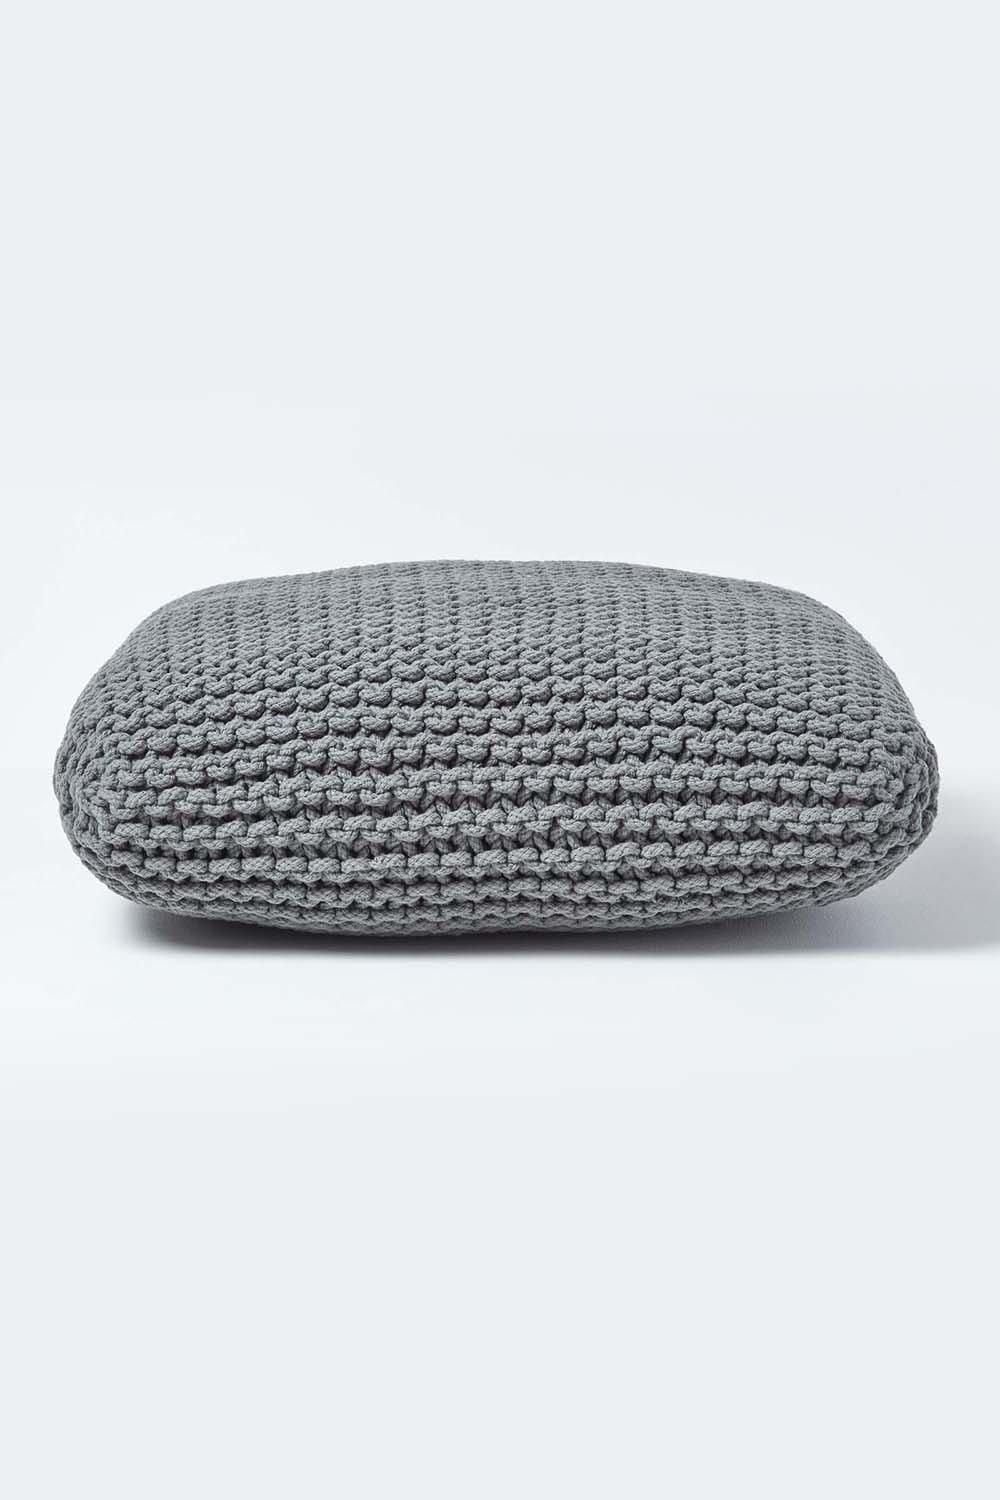 Homescapes Square Cotton Knitted Pouffe Floor Cushion|grey